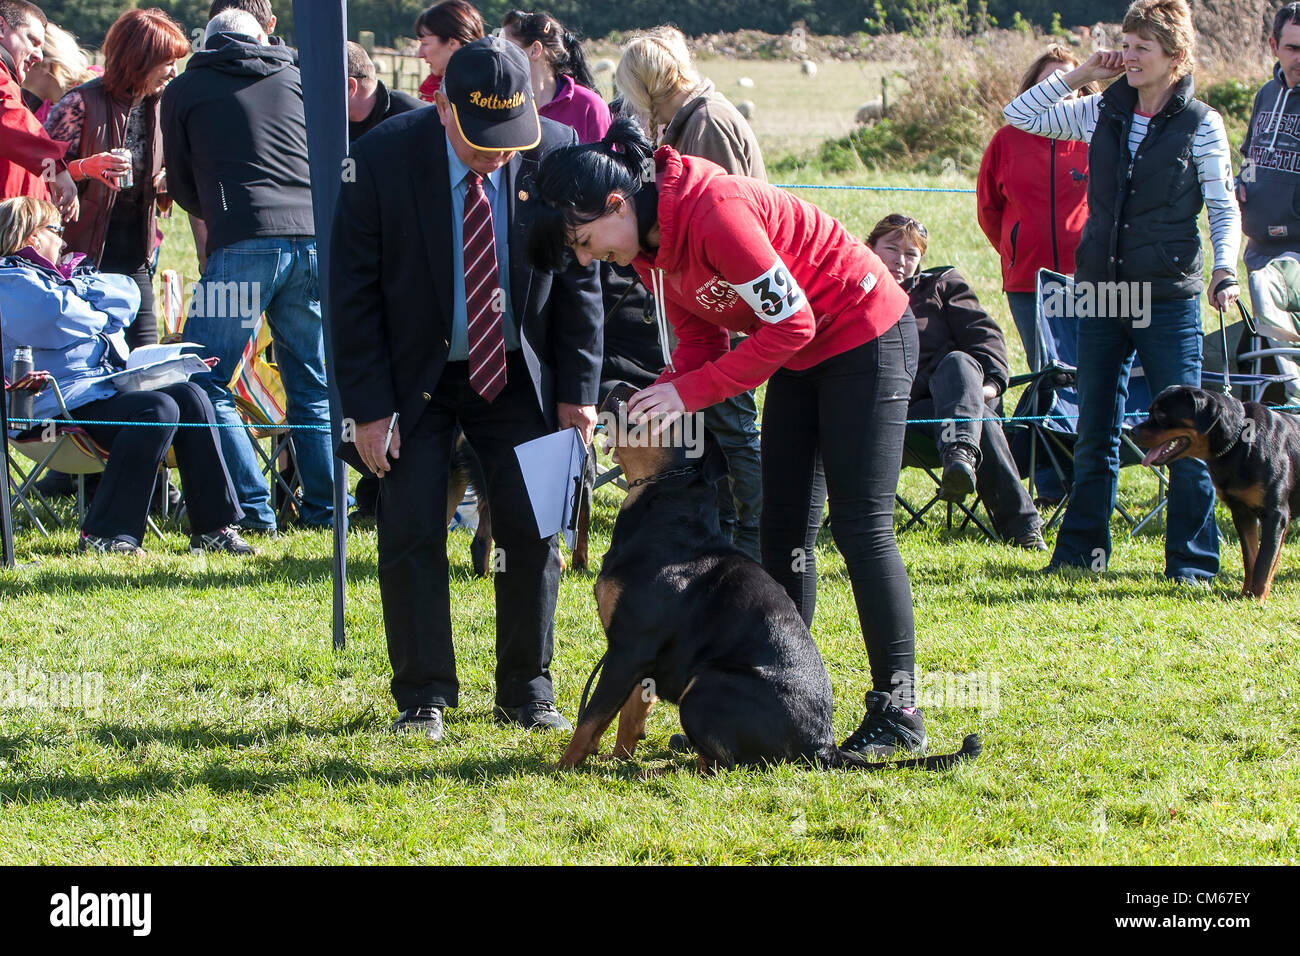 Northamptonshire, U.K. Saturday 14th October 2012. The Dog Centre, Harrington. (BRSDC) British Rottweiler Sporting Dog Club.  Owners and dogs have travelled from all over the U.K. to attend this weekend’s event the first run under German Rules Dog being judged by Herr Dieter Hoffman. Stock Photo